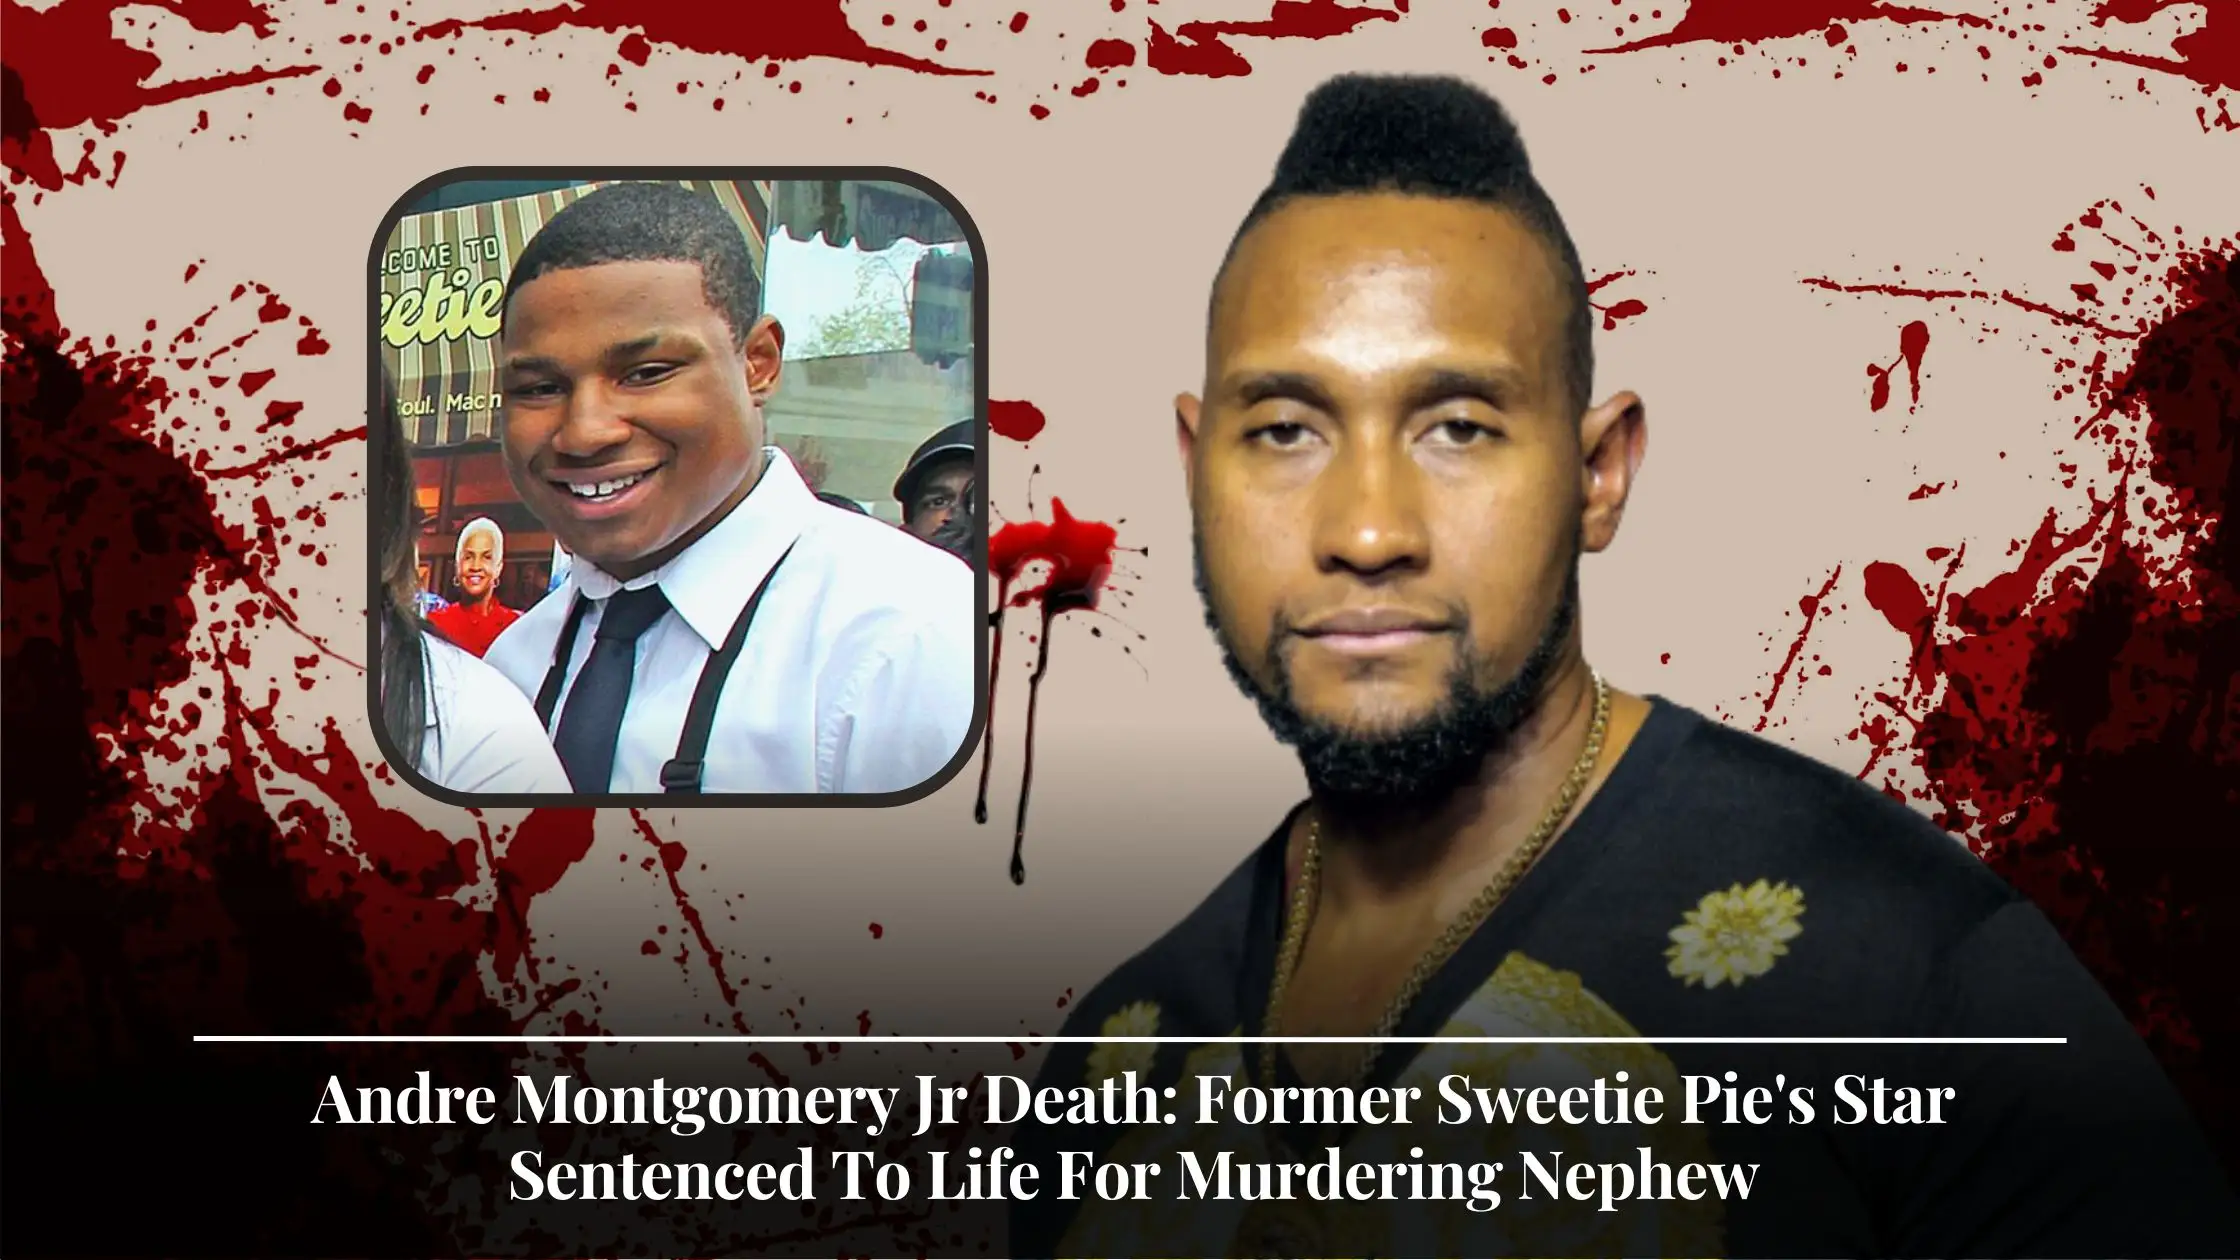 Andre Montgomery Jr Death Former Sweetie Pie's Star Sentenced To Life For Murdering Nephew